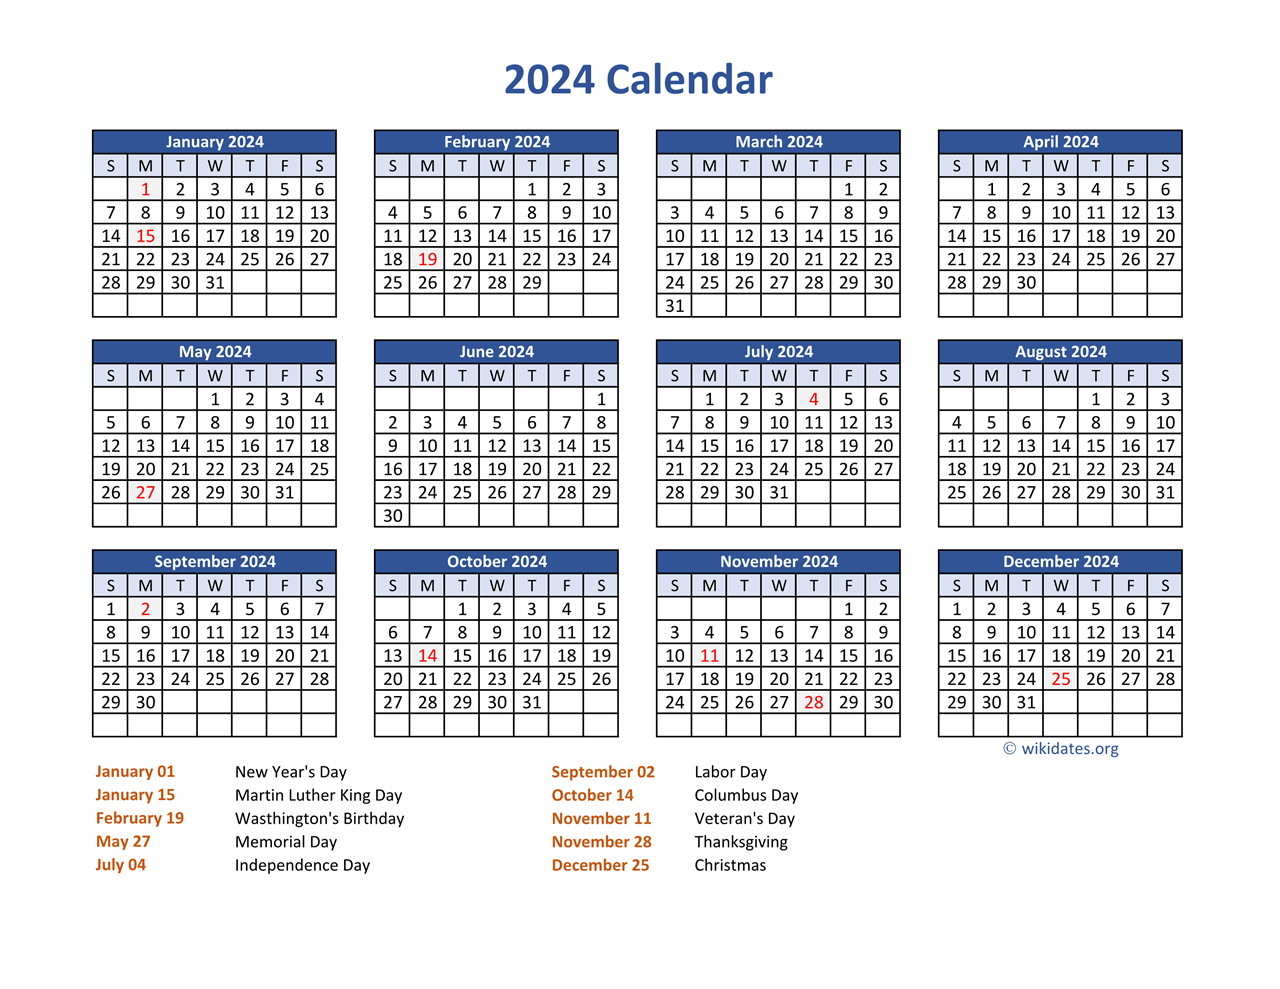 Pdf Calendar 2024 With Federal Holidays | Wikidates for Printable Calendar 2024 With Us Holidays